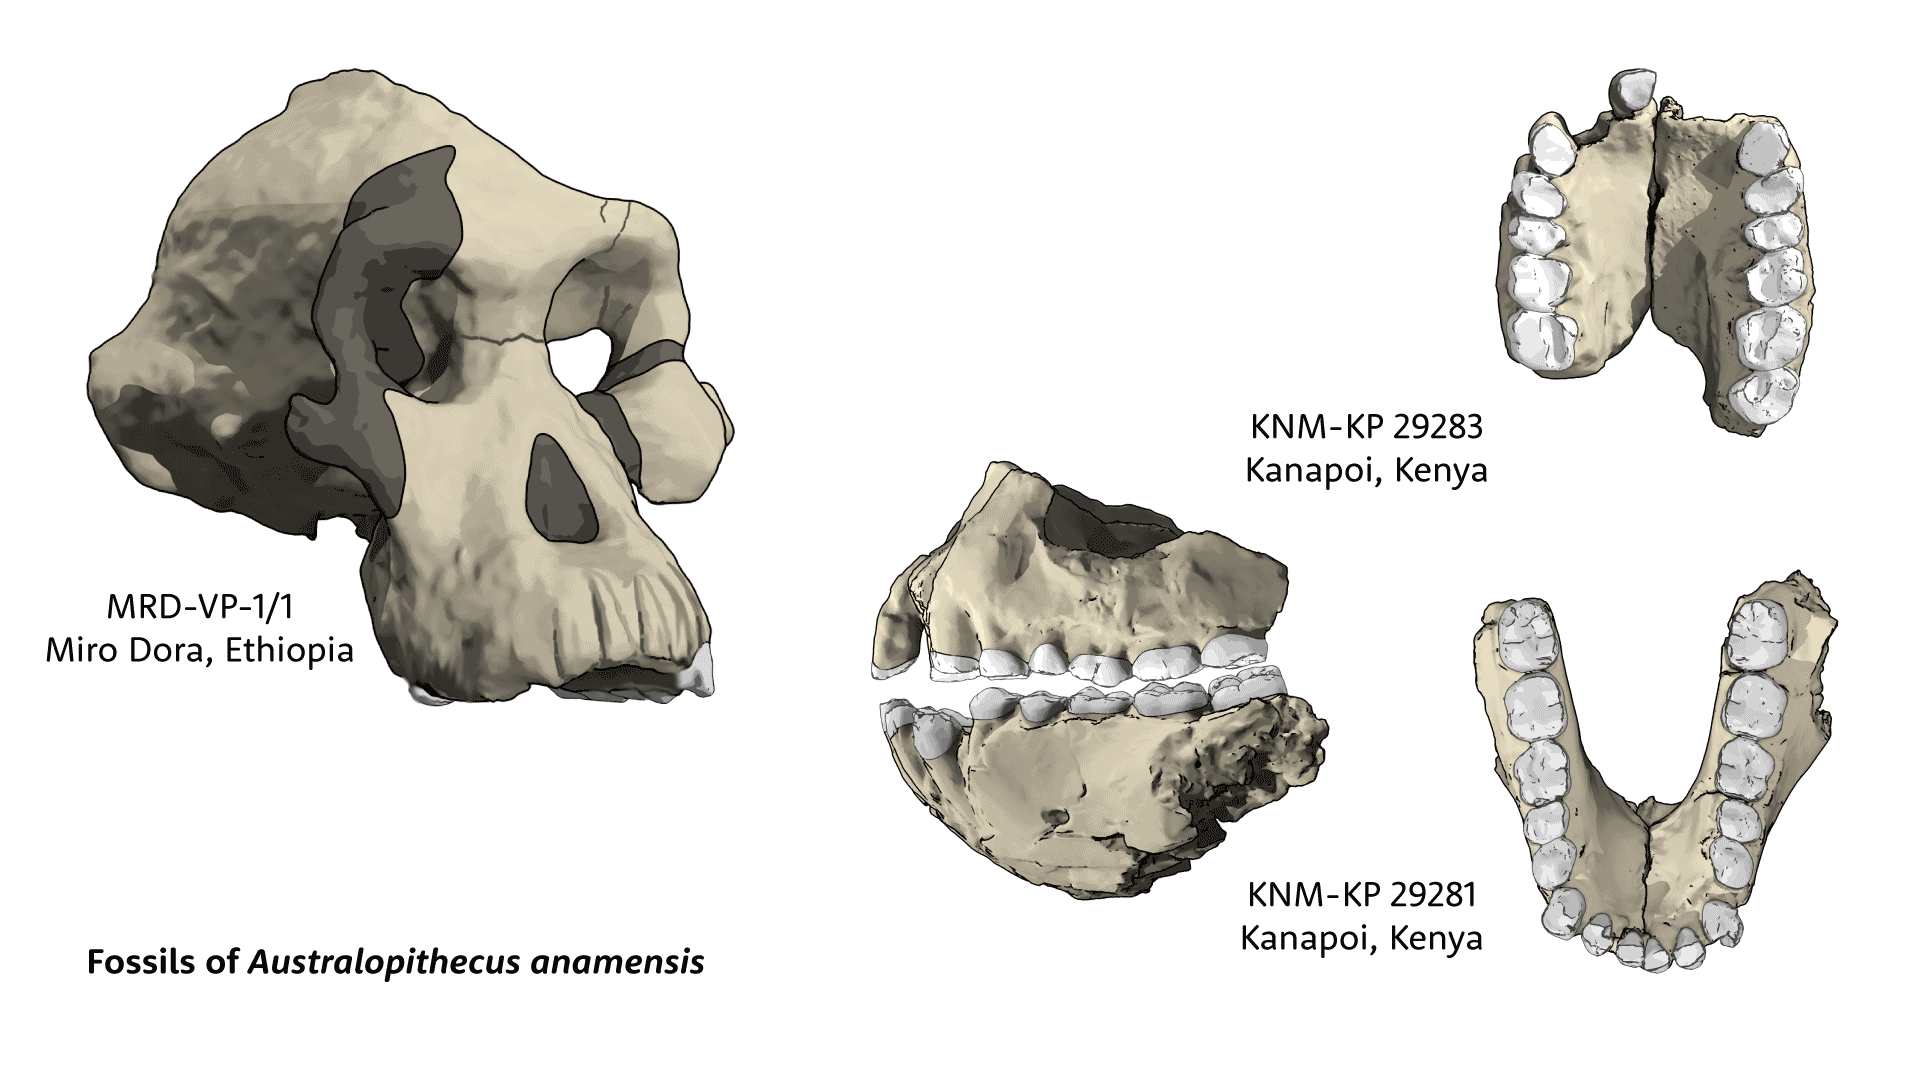 Fossils of Australopithecus afarensis, with MRD-VP-1/1 skull at left, and KNM-KP 29283 and KNM-KP 29281 maxilla and mandible at right